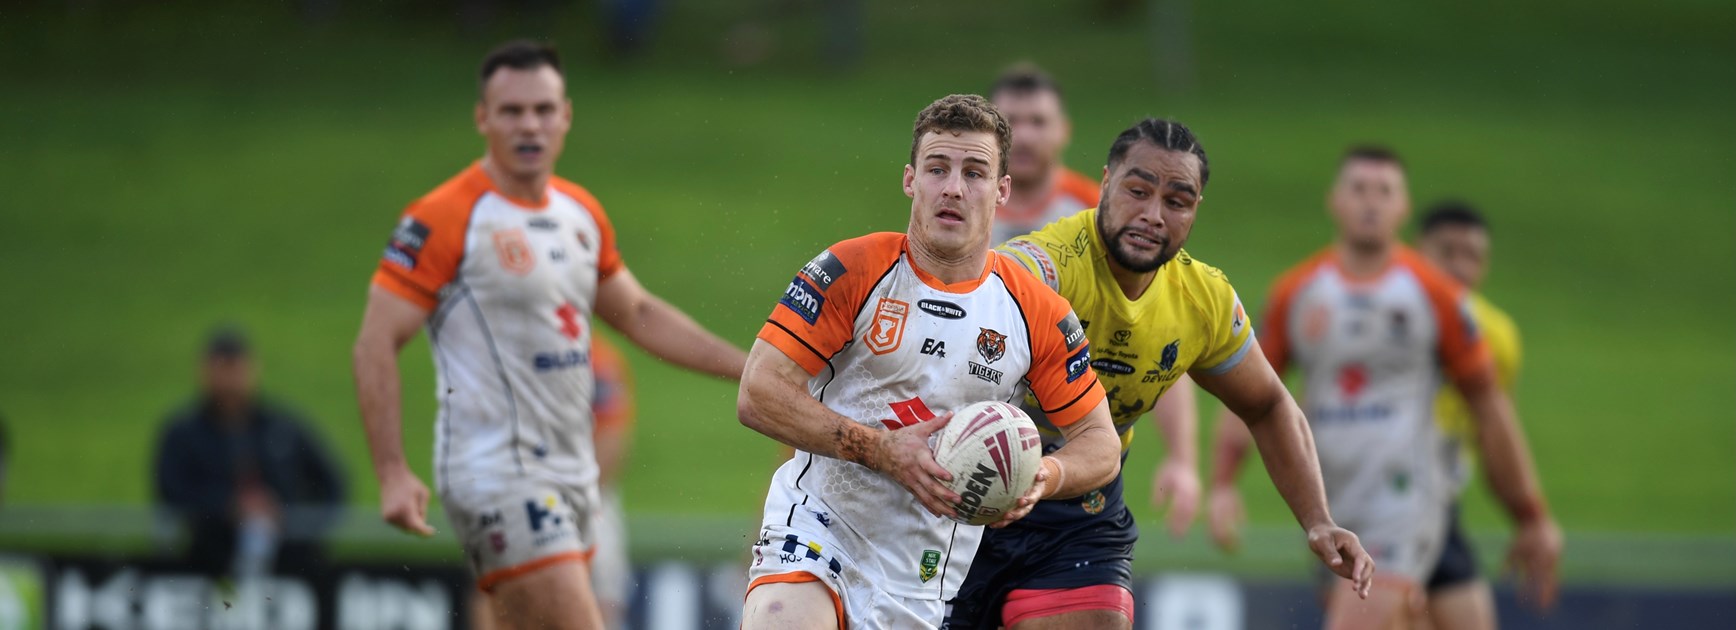 Tigers defeat Devils as away team prevails again